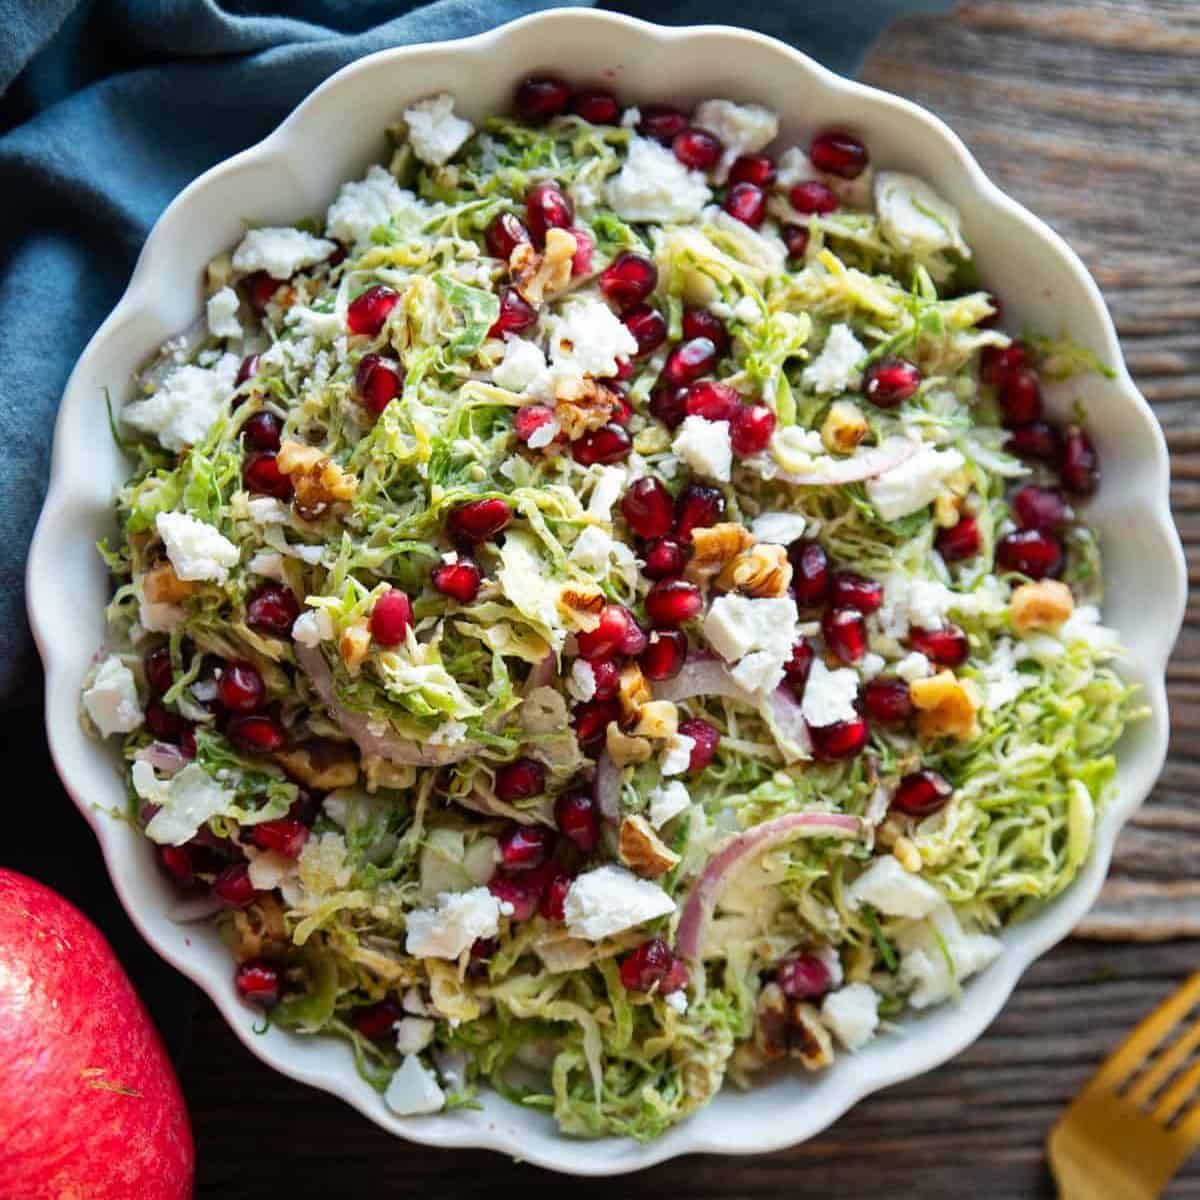 Shaved brussels sprout salad in a bowl topped with walnuts and pomegranate.